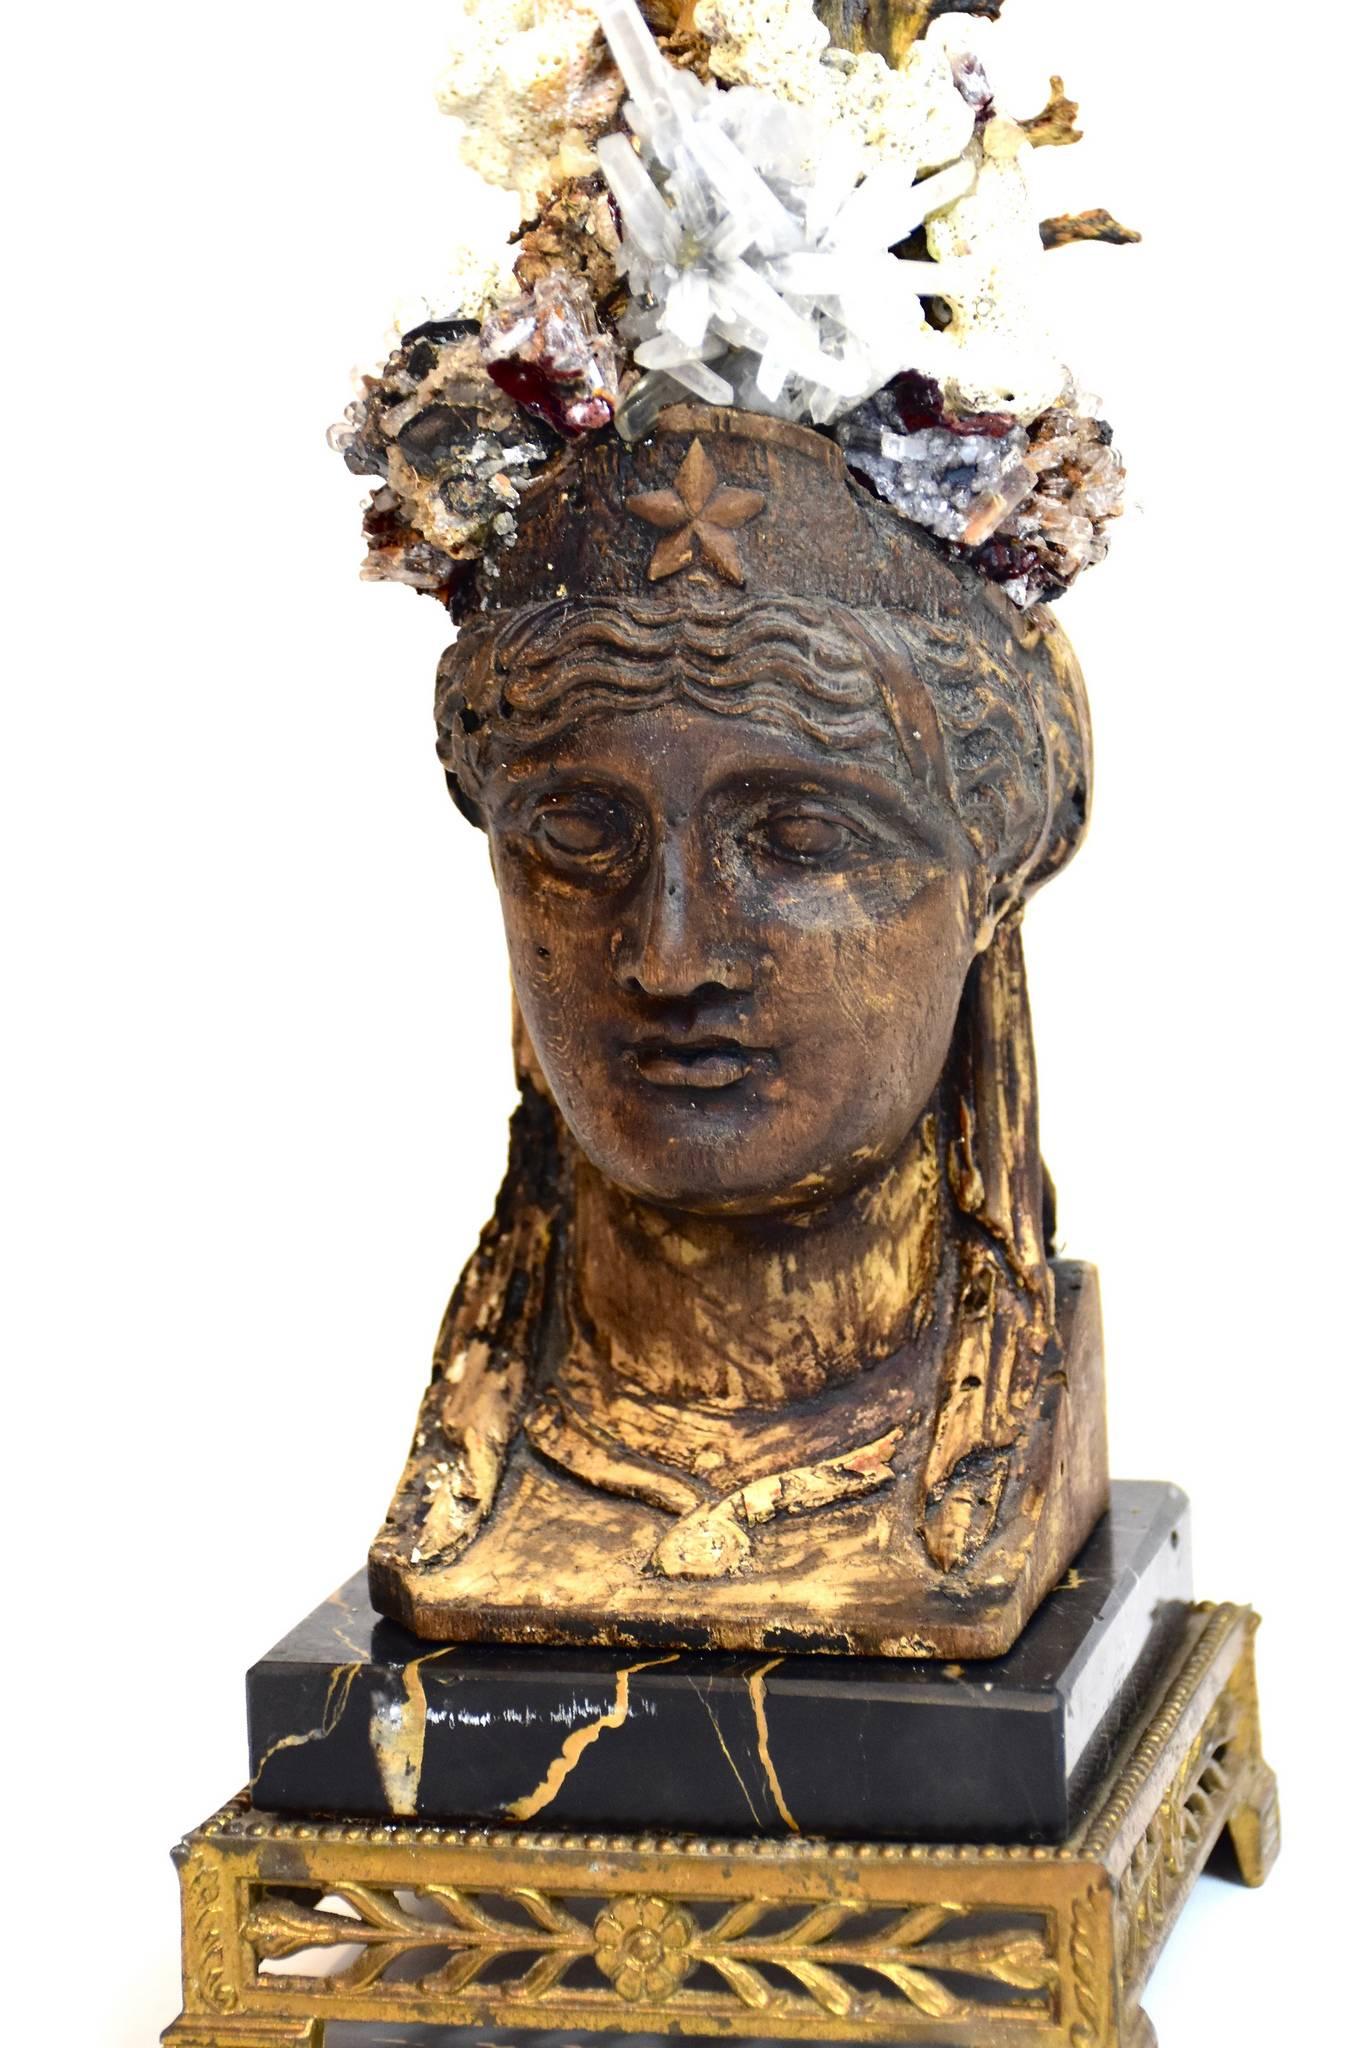 A 200 year old Empire carved bust fragment is adorned with an organic blooming crown to include a giant black coral sea fan, corals, andradite garnets, hemimorphite and quartz specimens. The base is a 19th century Michelangelo marble slab sitting on